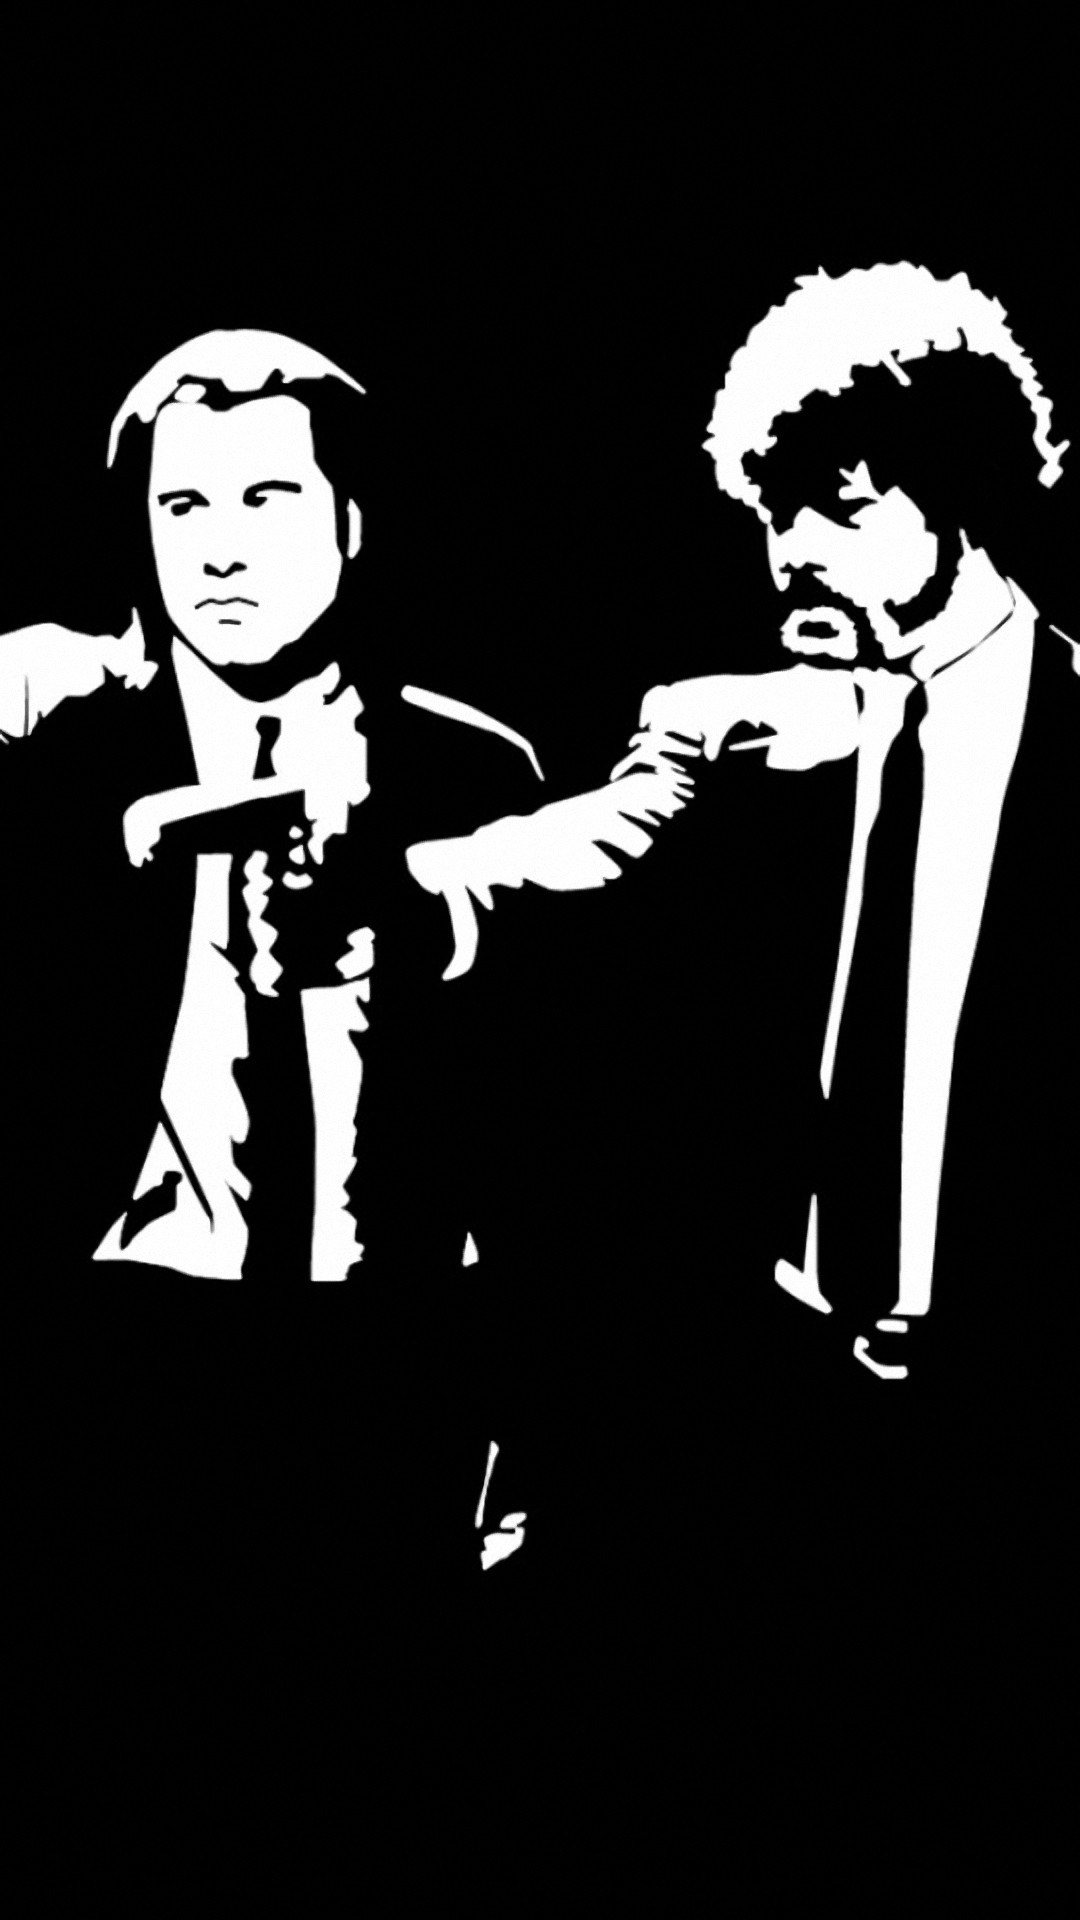 1080x1920 Search Results for “pulp fiction wallpaper for phone” – Adorable Wallpapers